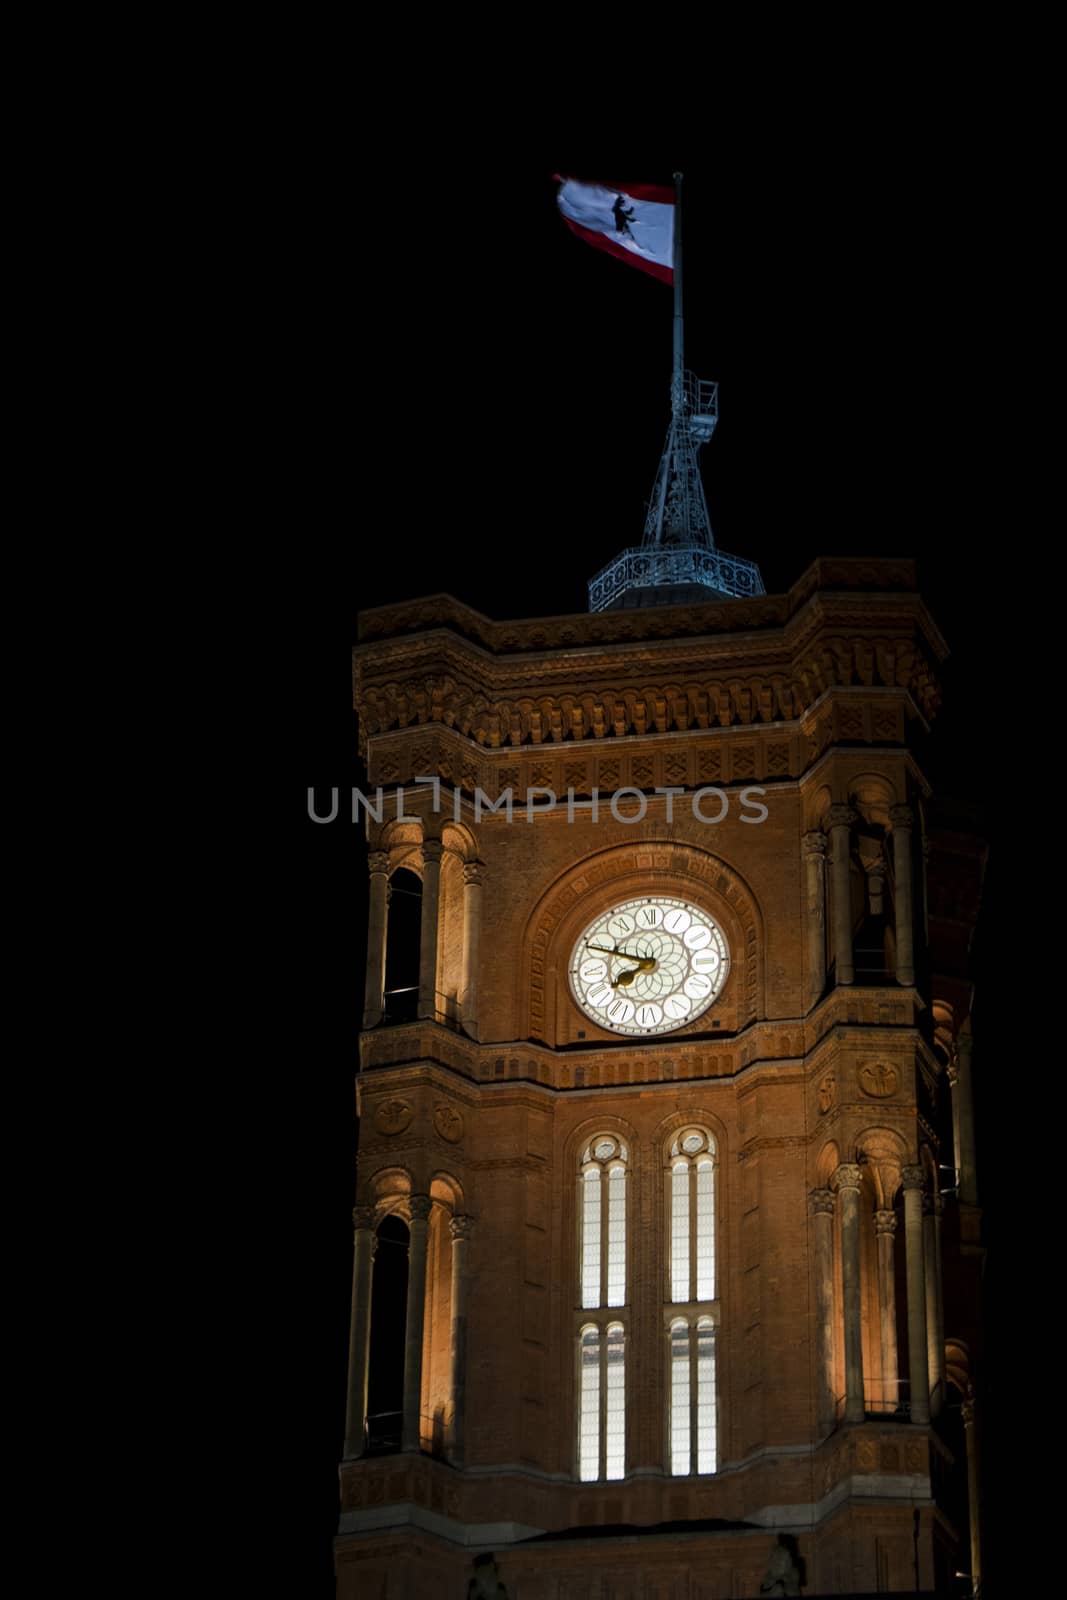 Famous landmark and architecture clock tower, red tower in Berlin, Germany